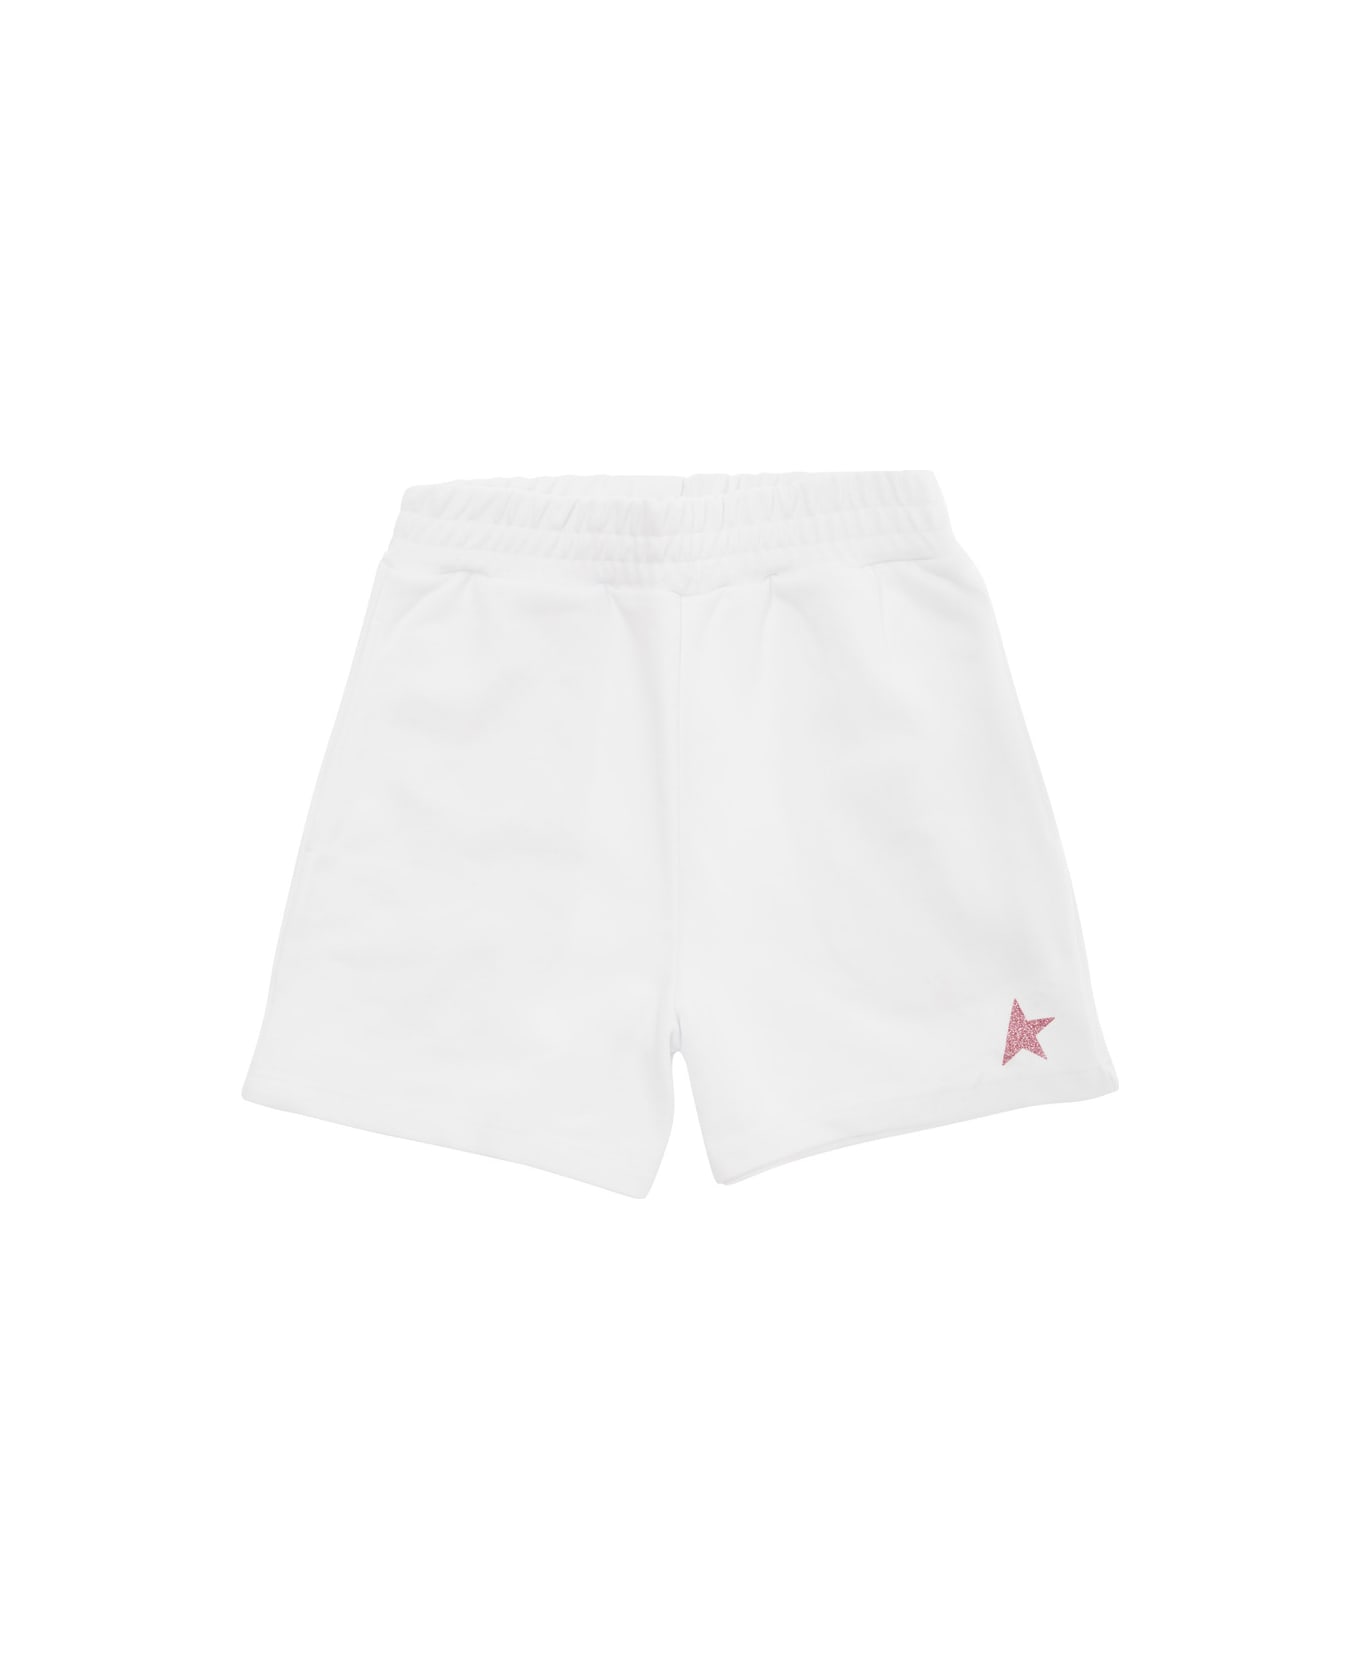 Golden Goose Star / Girl's Fleece Shorts / Small Star Glitter Printed Include Cod Gyp - WHITE/ GOLD PINK